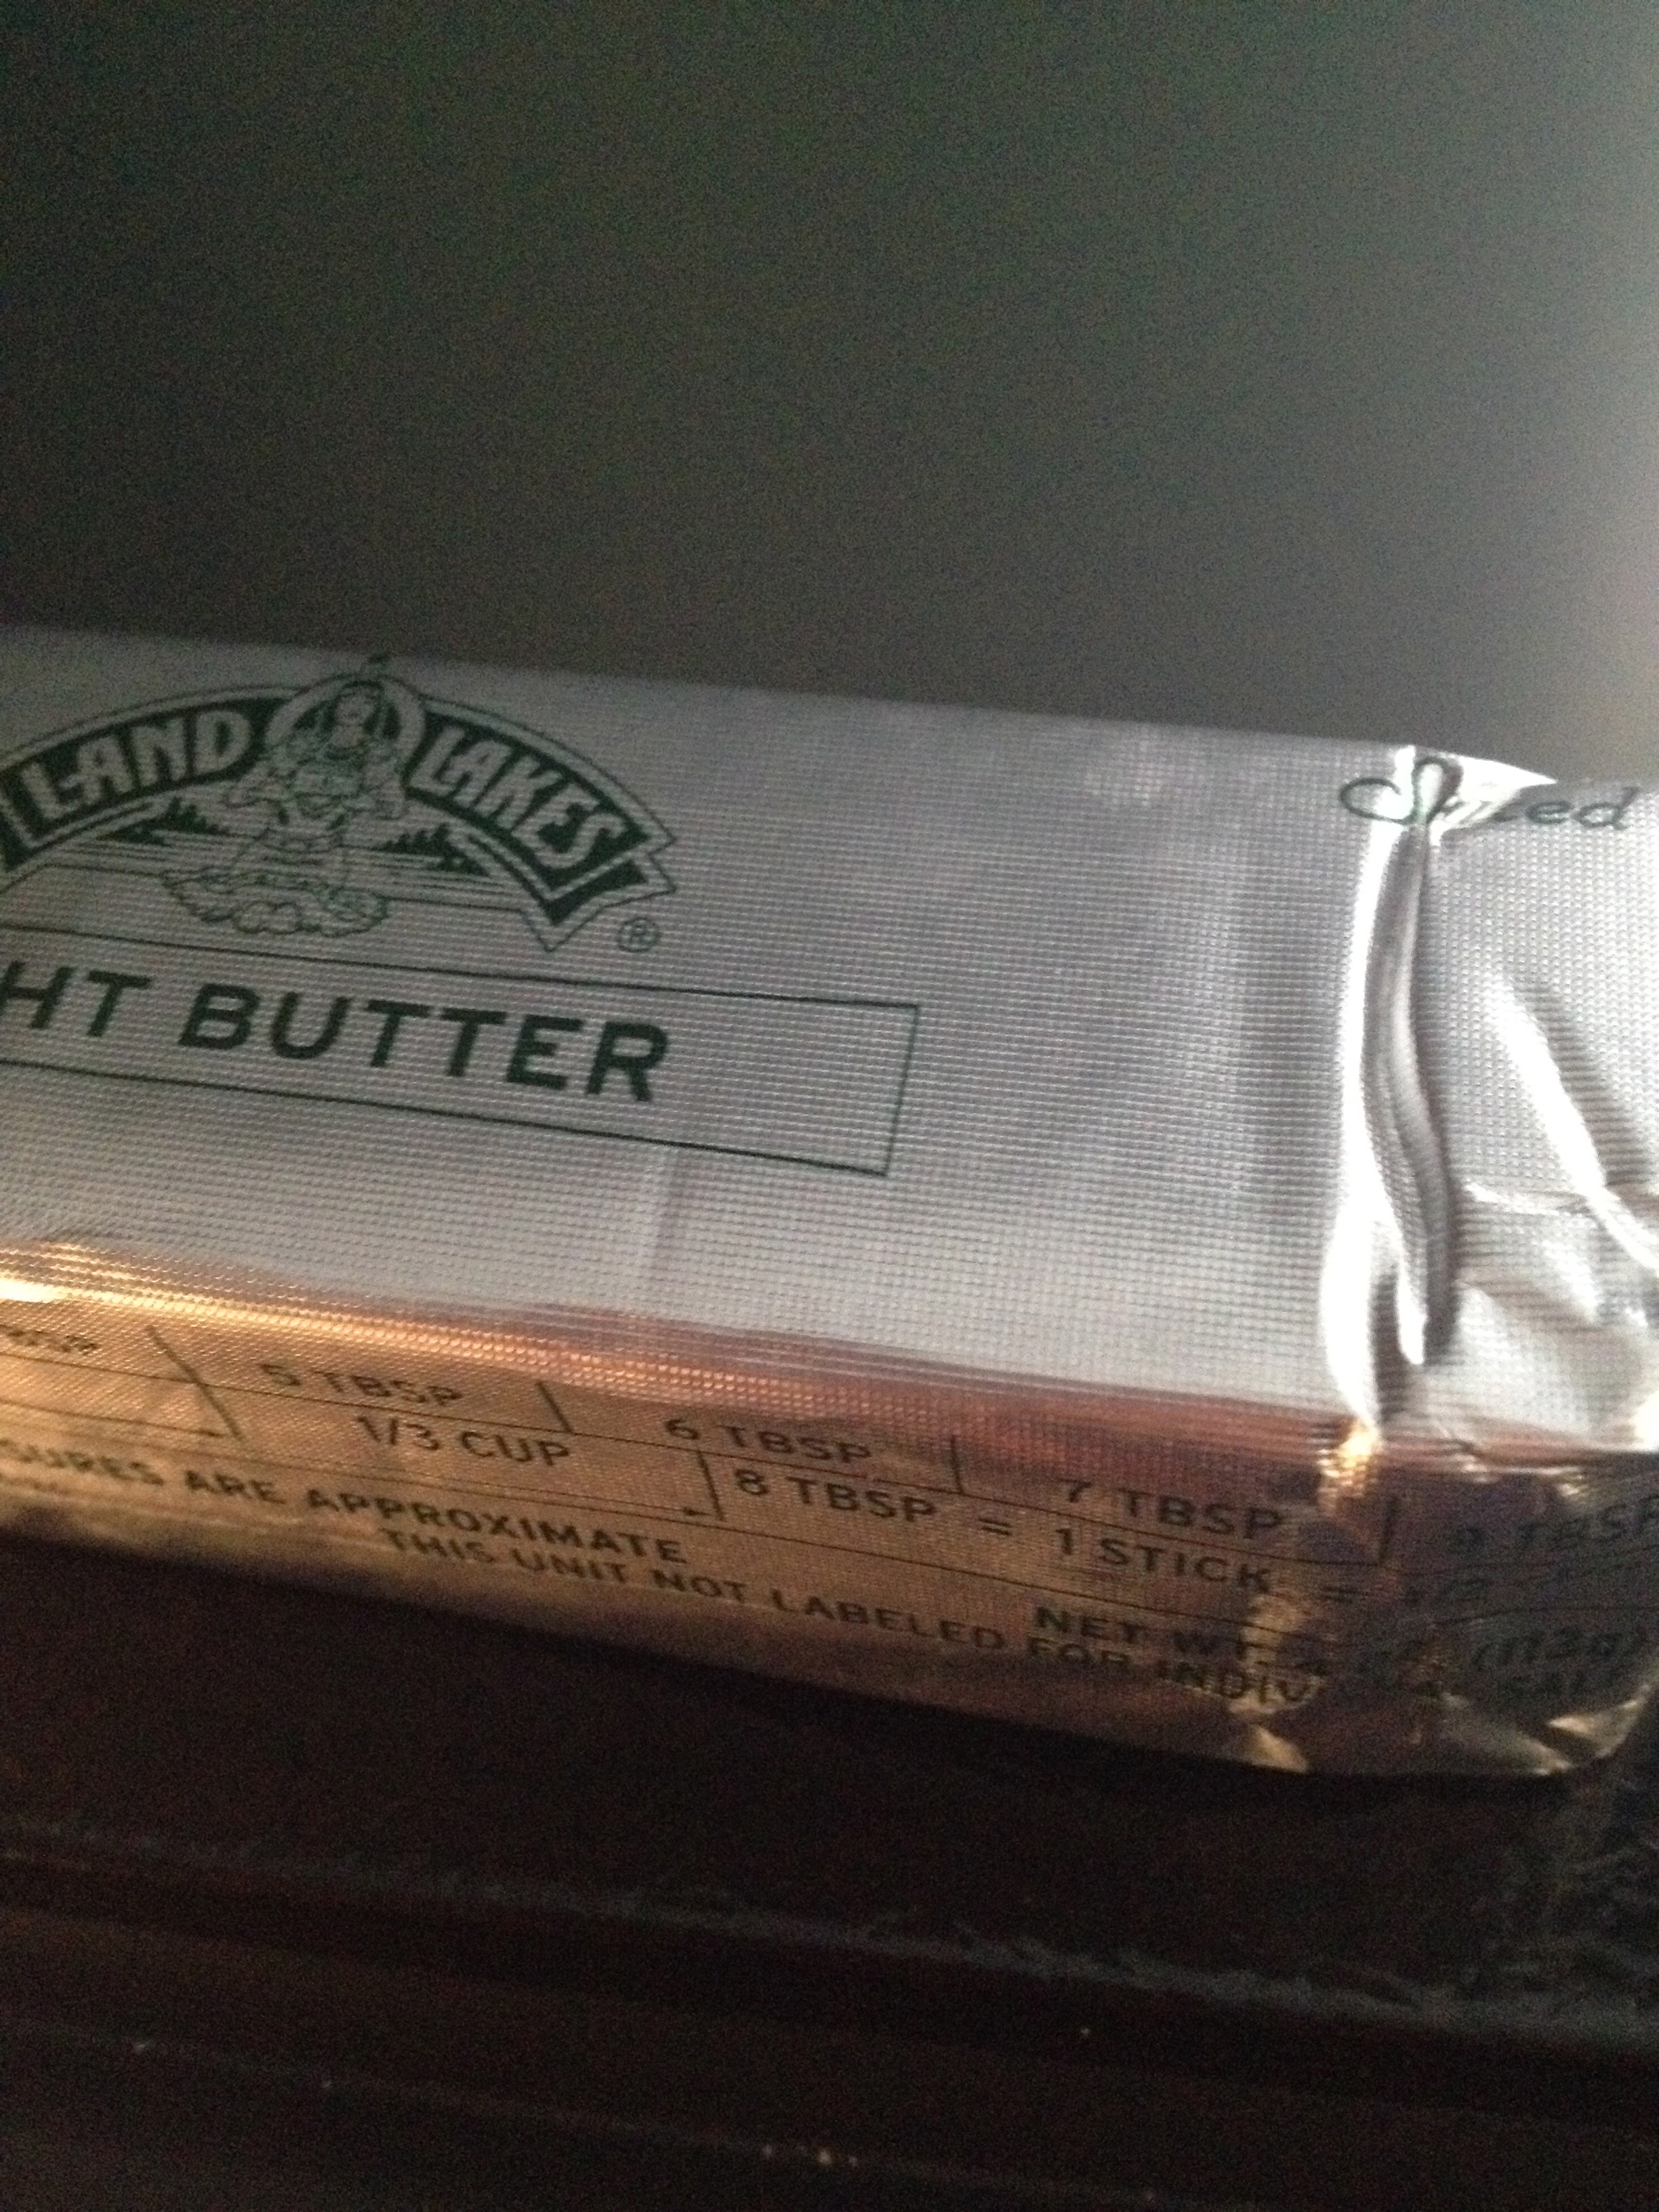 Having a diet that includes raw butter, butter